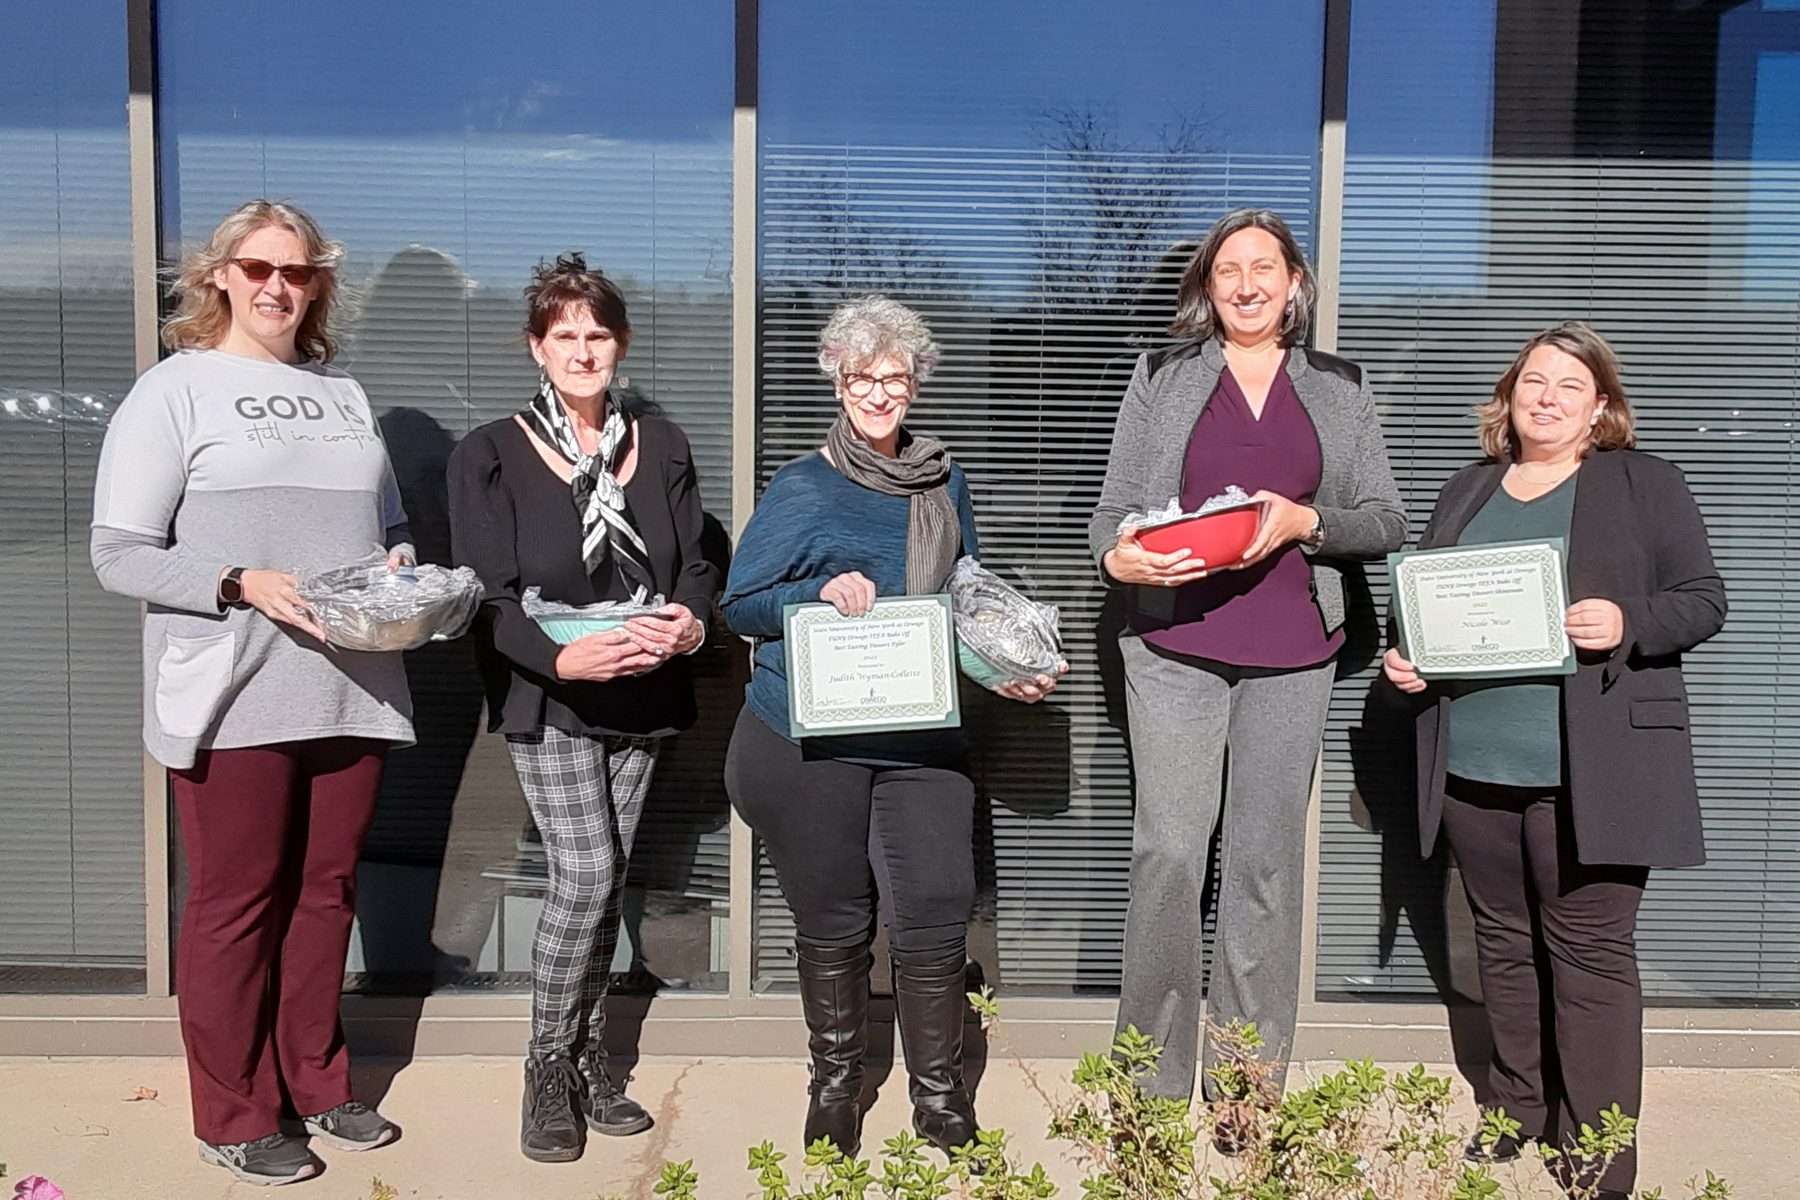 The annual SEFA bake sales held Oct. 24 and Oct. 31 offered opportunities to become known as a SUNY Oswego champion baker while proceeds benefited the United Way of Greater Oswego County.